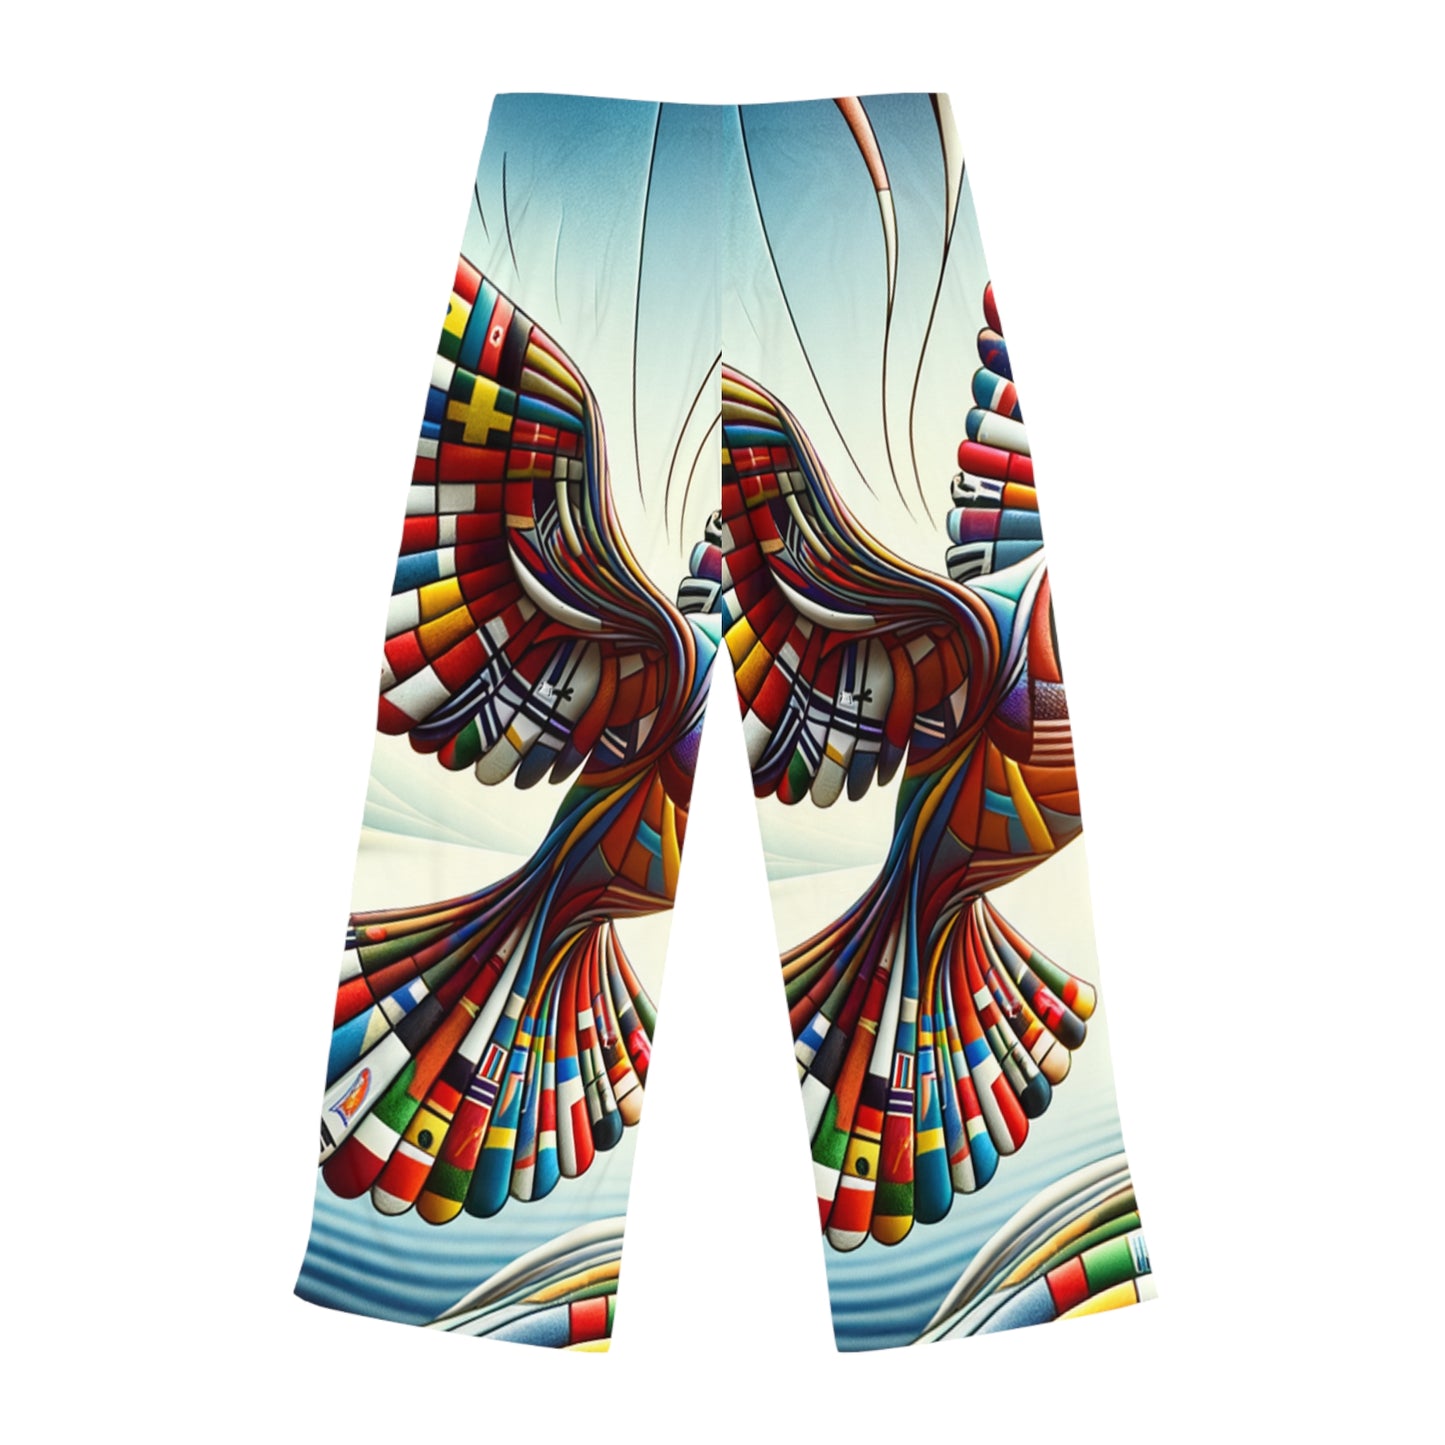 "Global Tapestry of Tranquility" - Women lounge pants